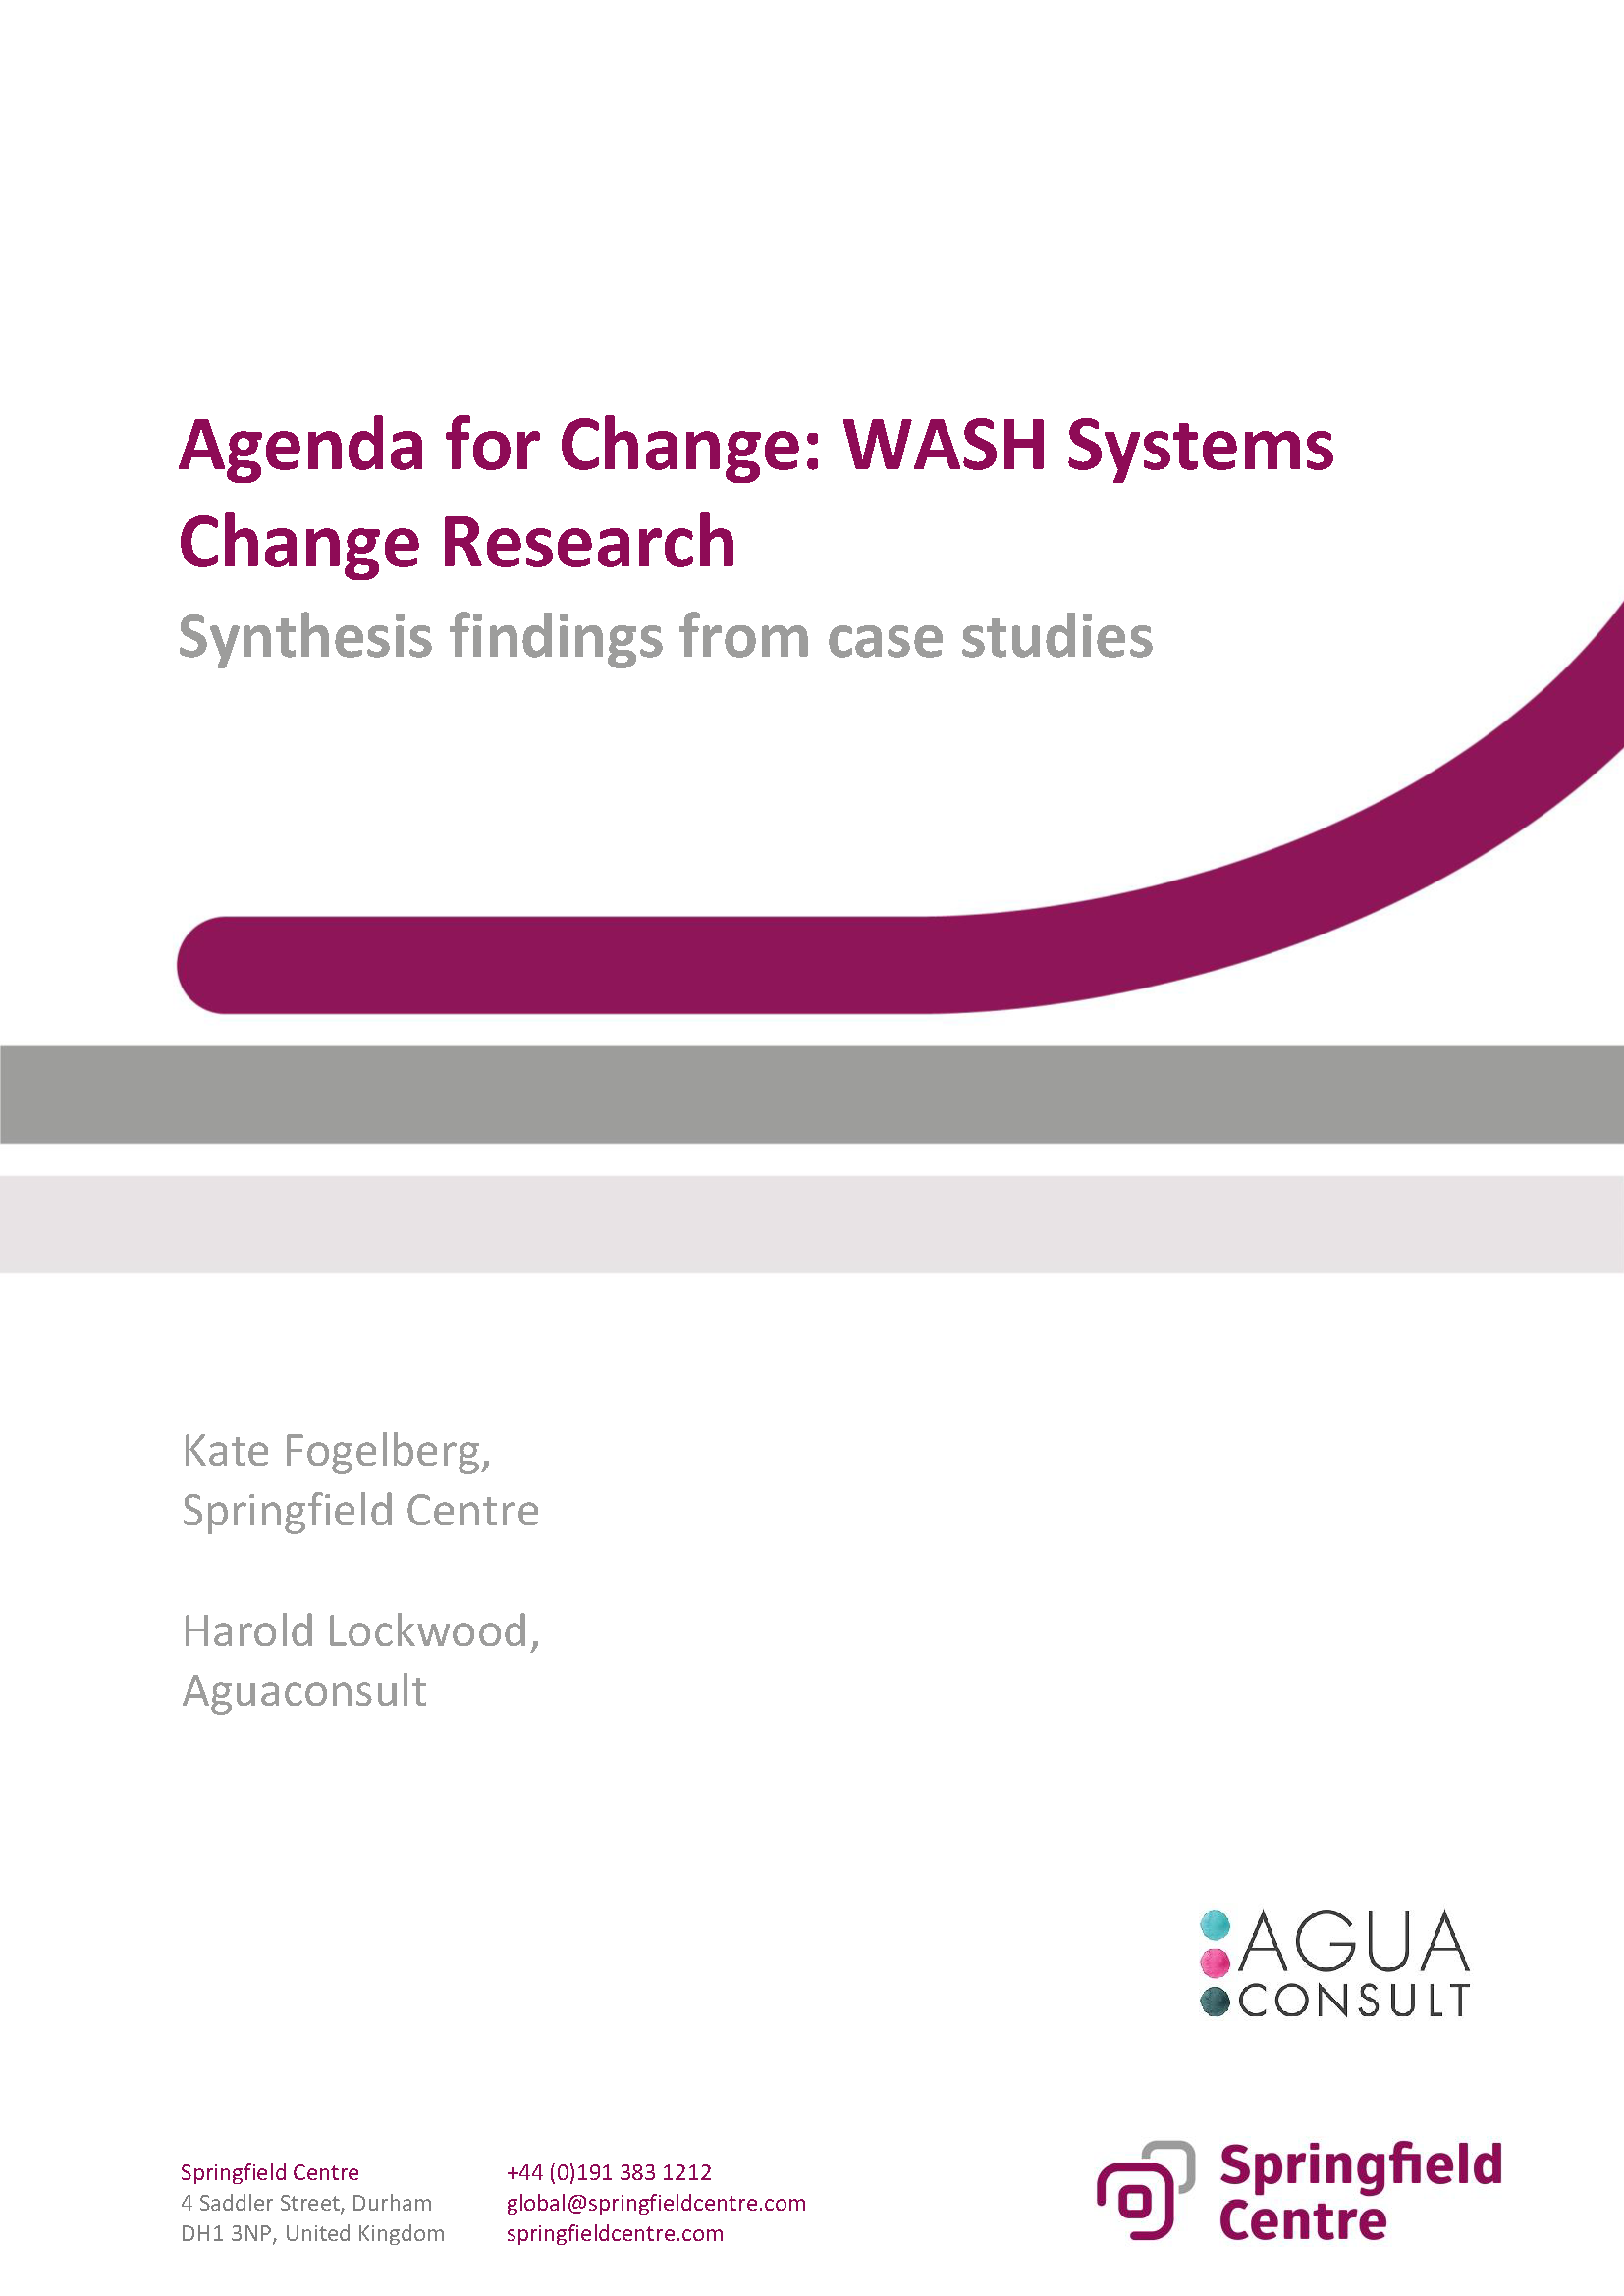 Cover page for Agenda for Change: WASH Systems Change Research